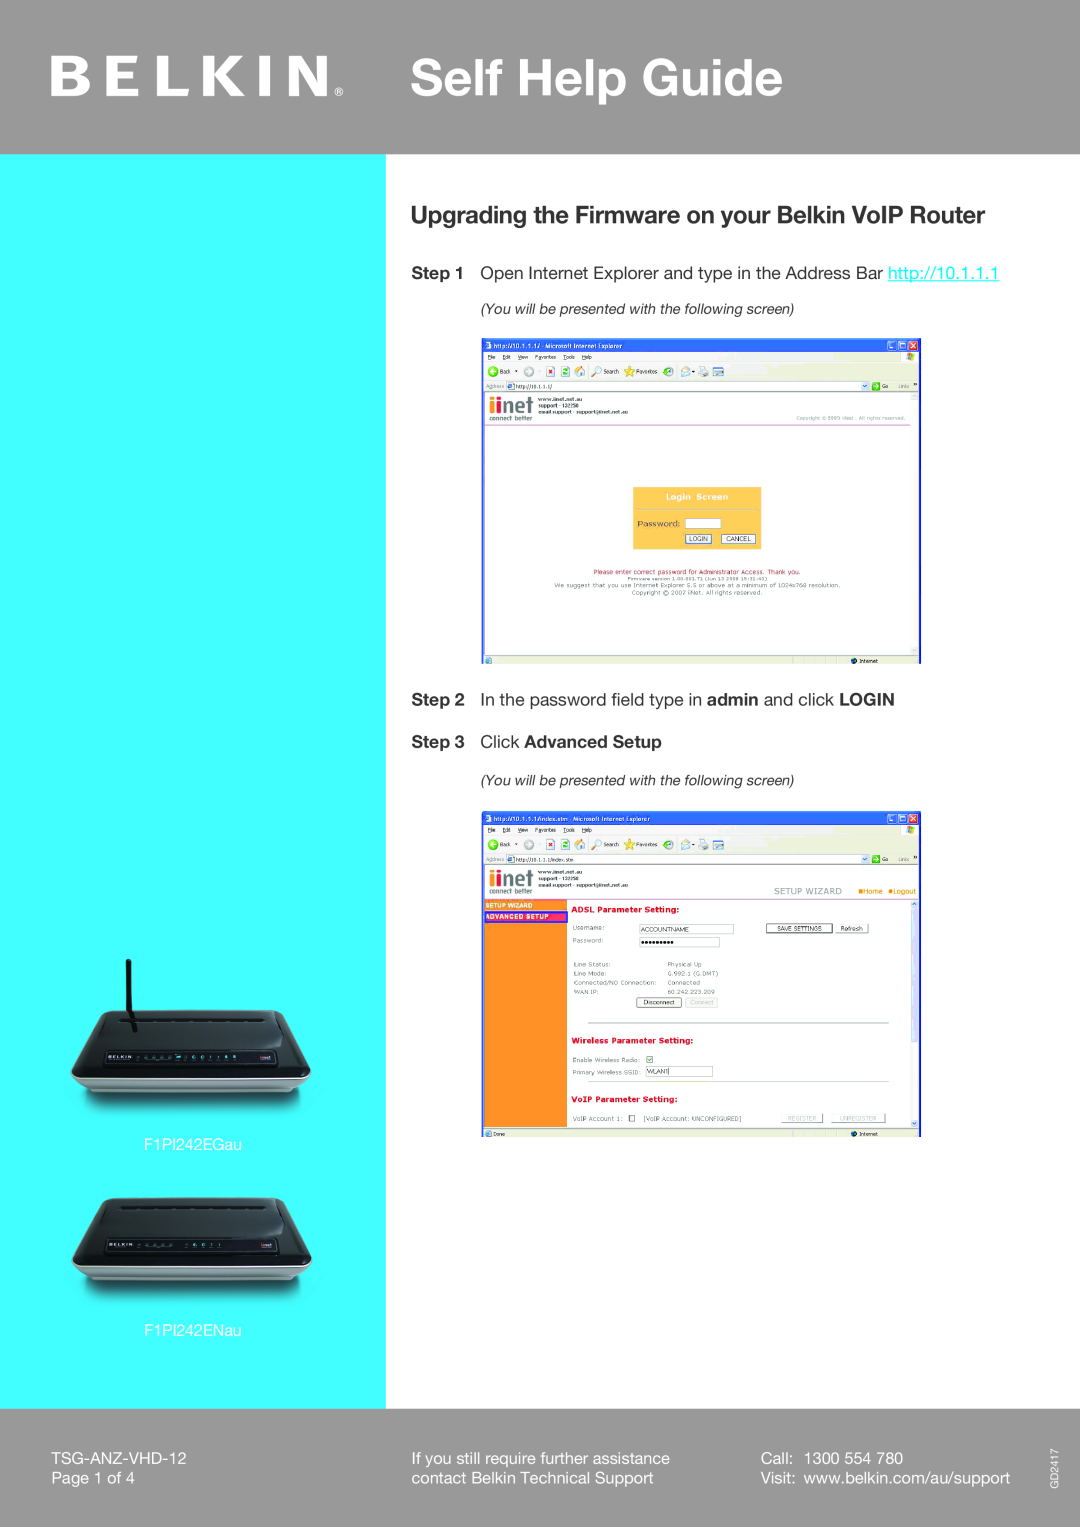 Belkin F1PI242EGAU manual Self Help Guide, Click Advanced Setup, Upgrading the Firmware on your Belkin VoIP Router, Call 